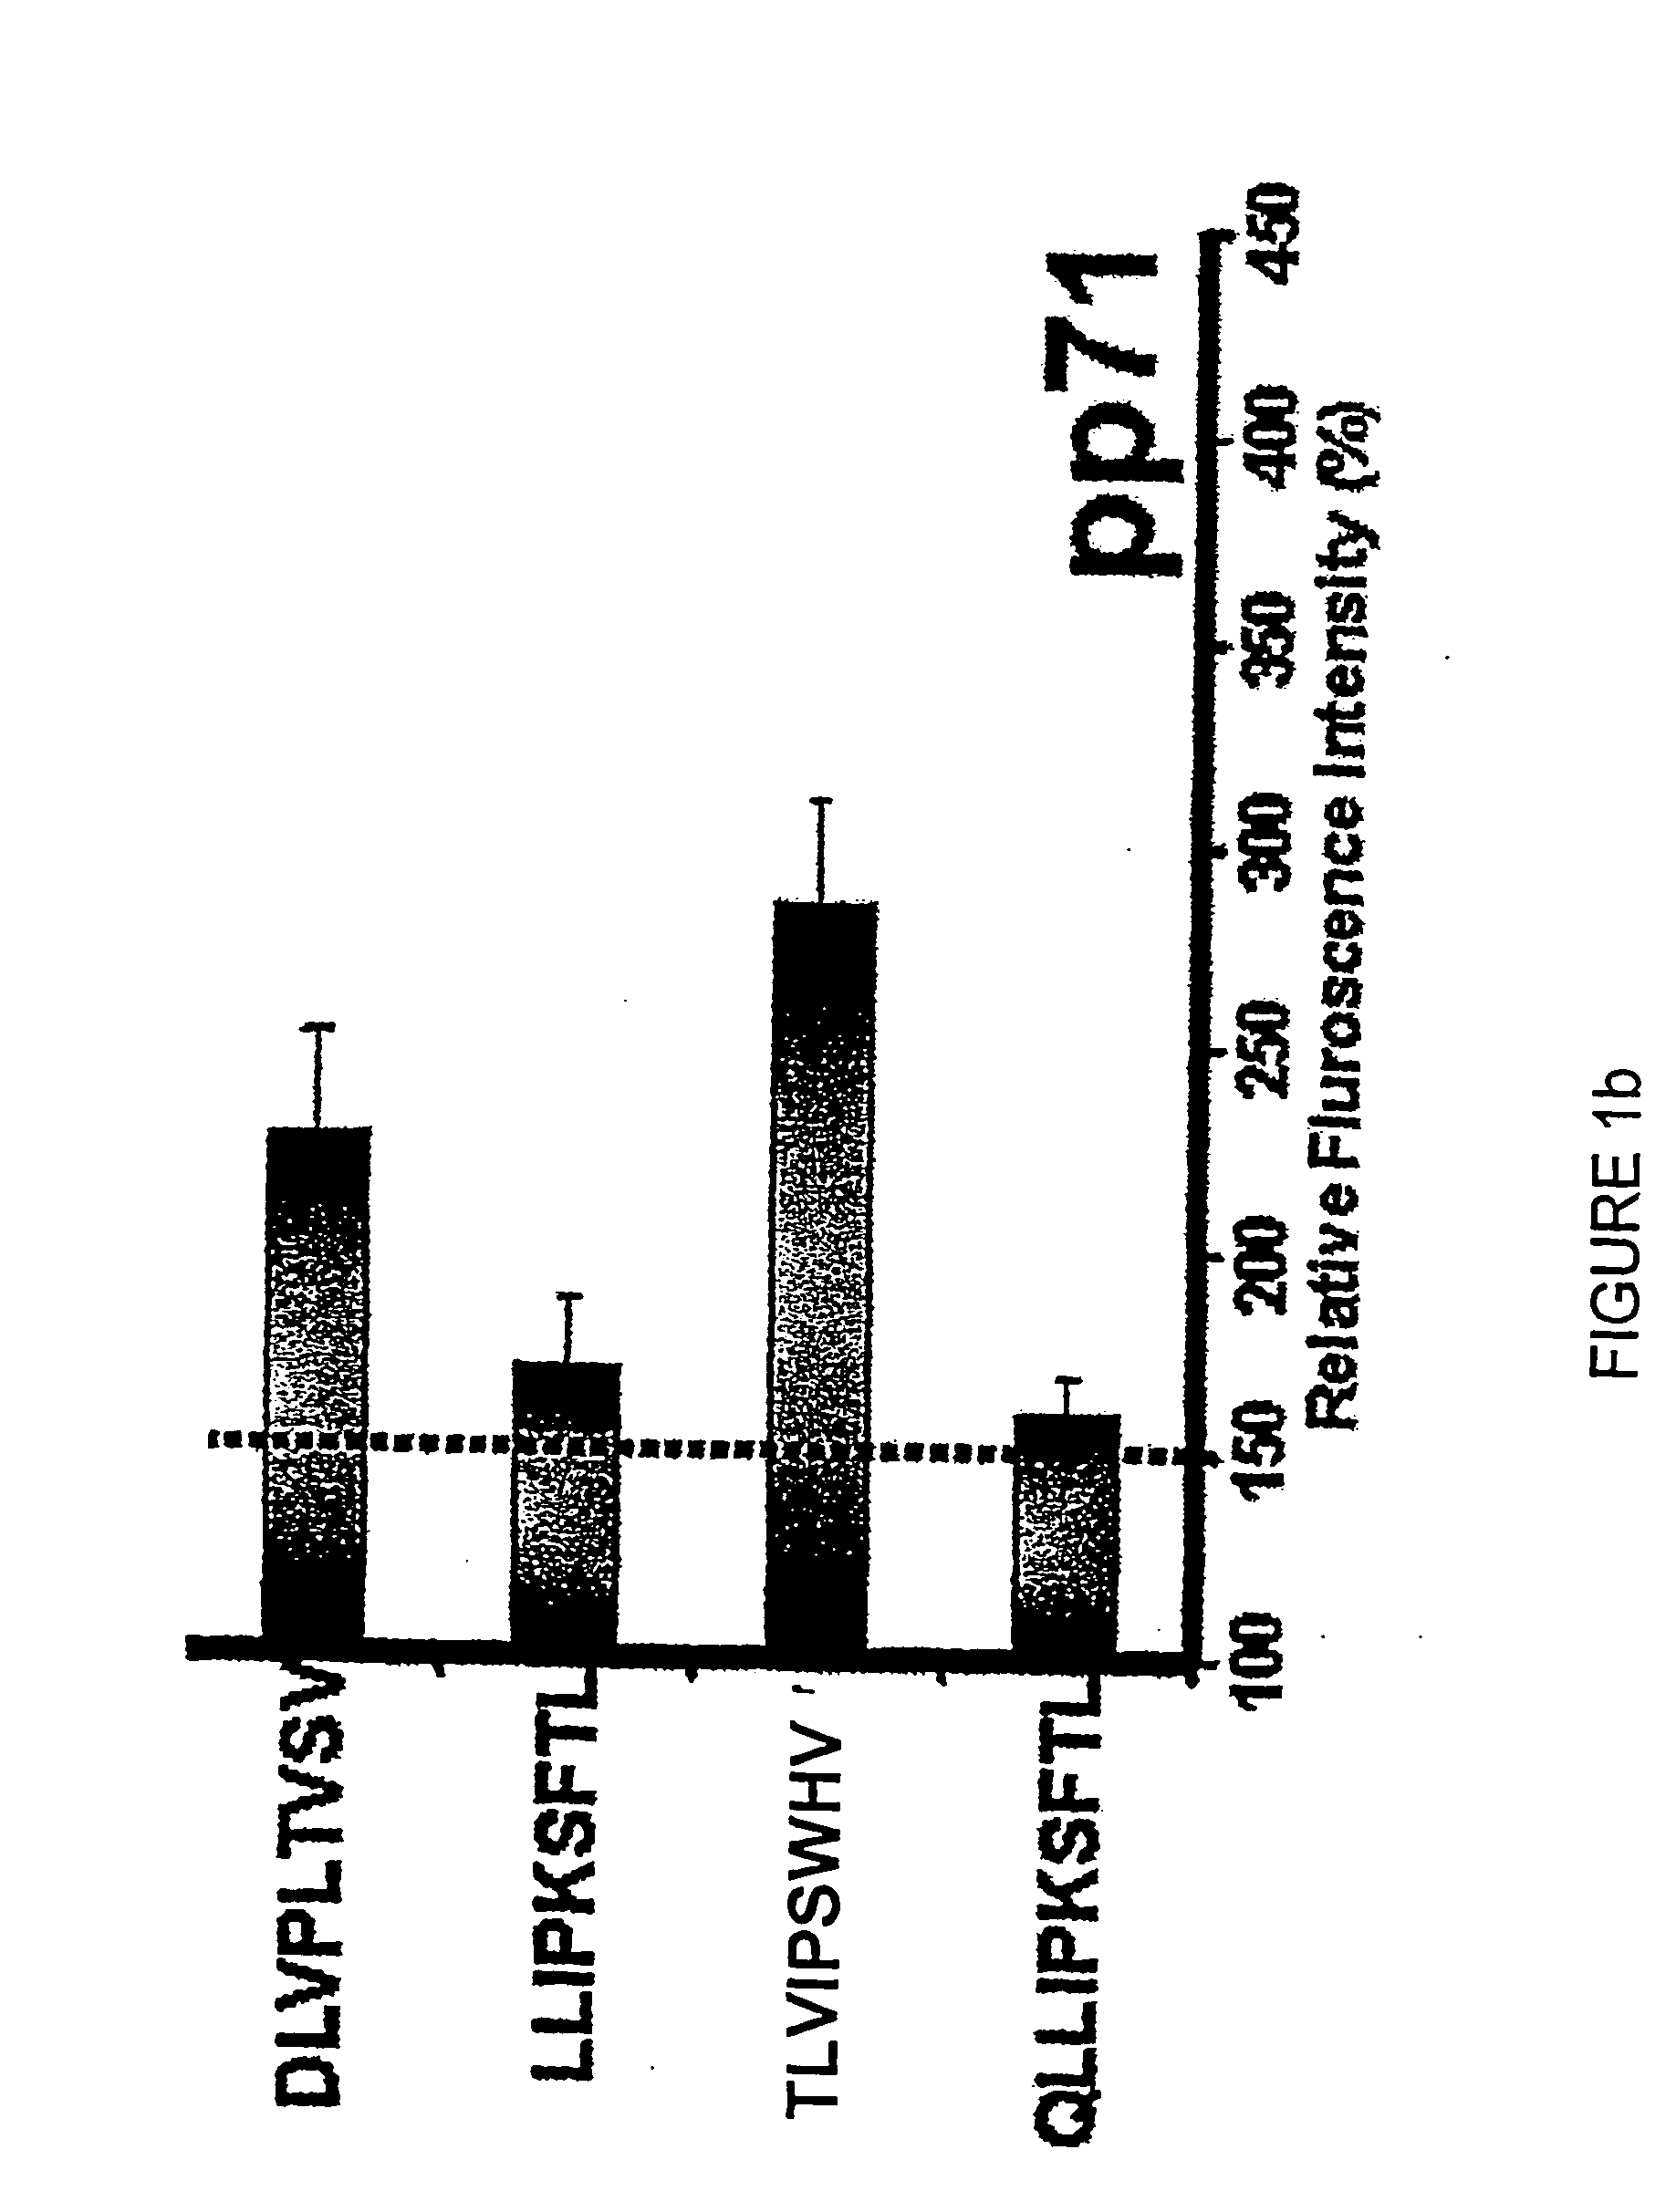 Novel human cytomegalovirus (hcmv) cytotoxic t cell epitopes, polyepitopes compositions comprising same and diagnostic and prophylactic and therapeutic uses therefor